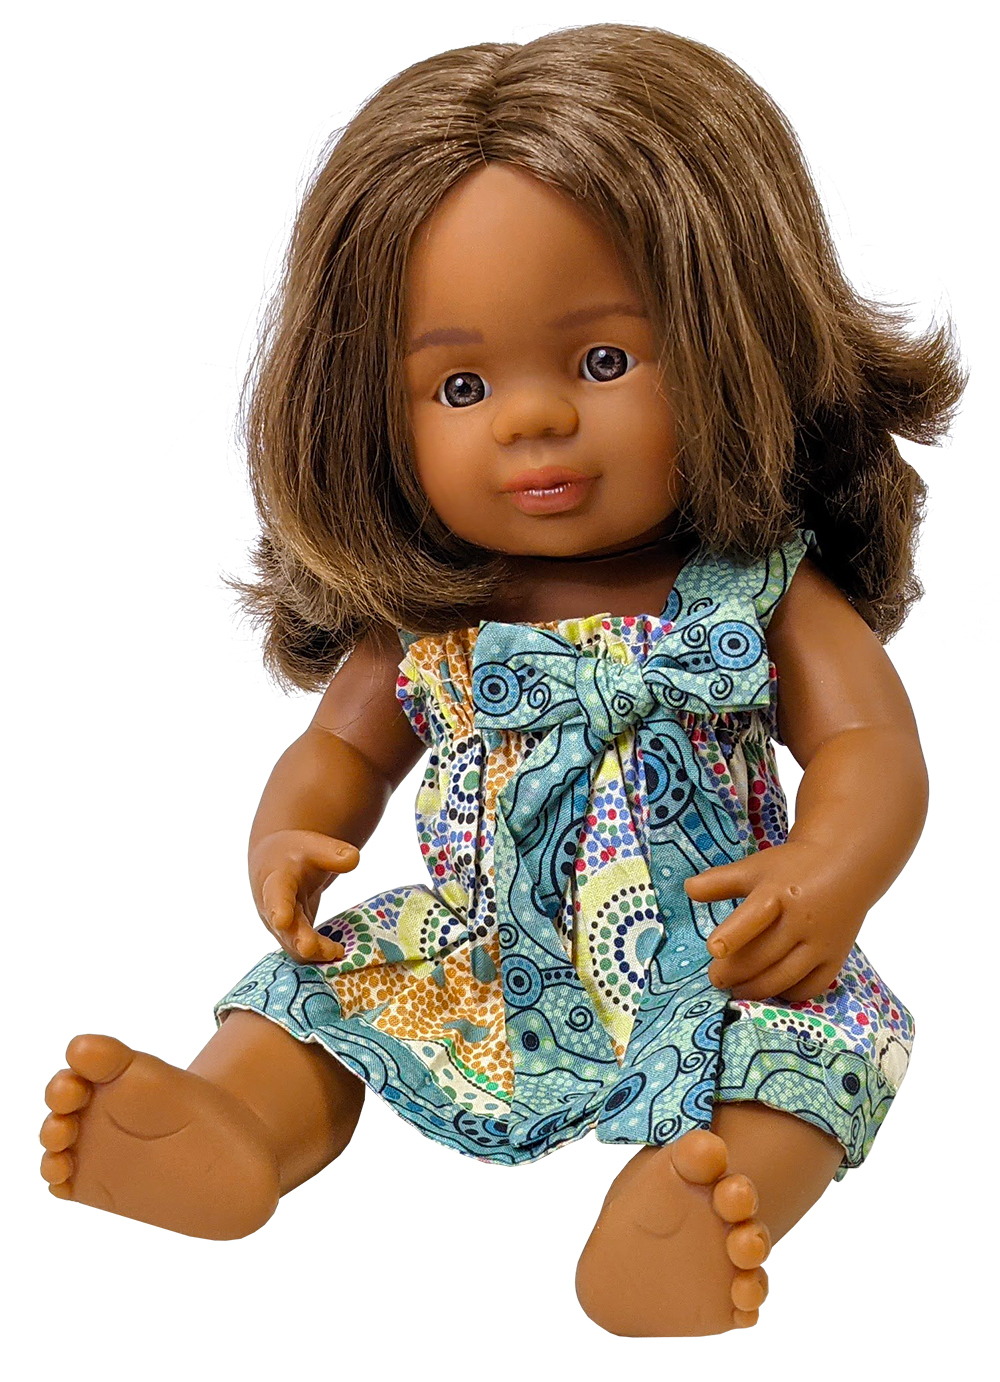 Baby Doll 38cm - Aboriginal Girl with Clothing